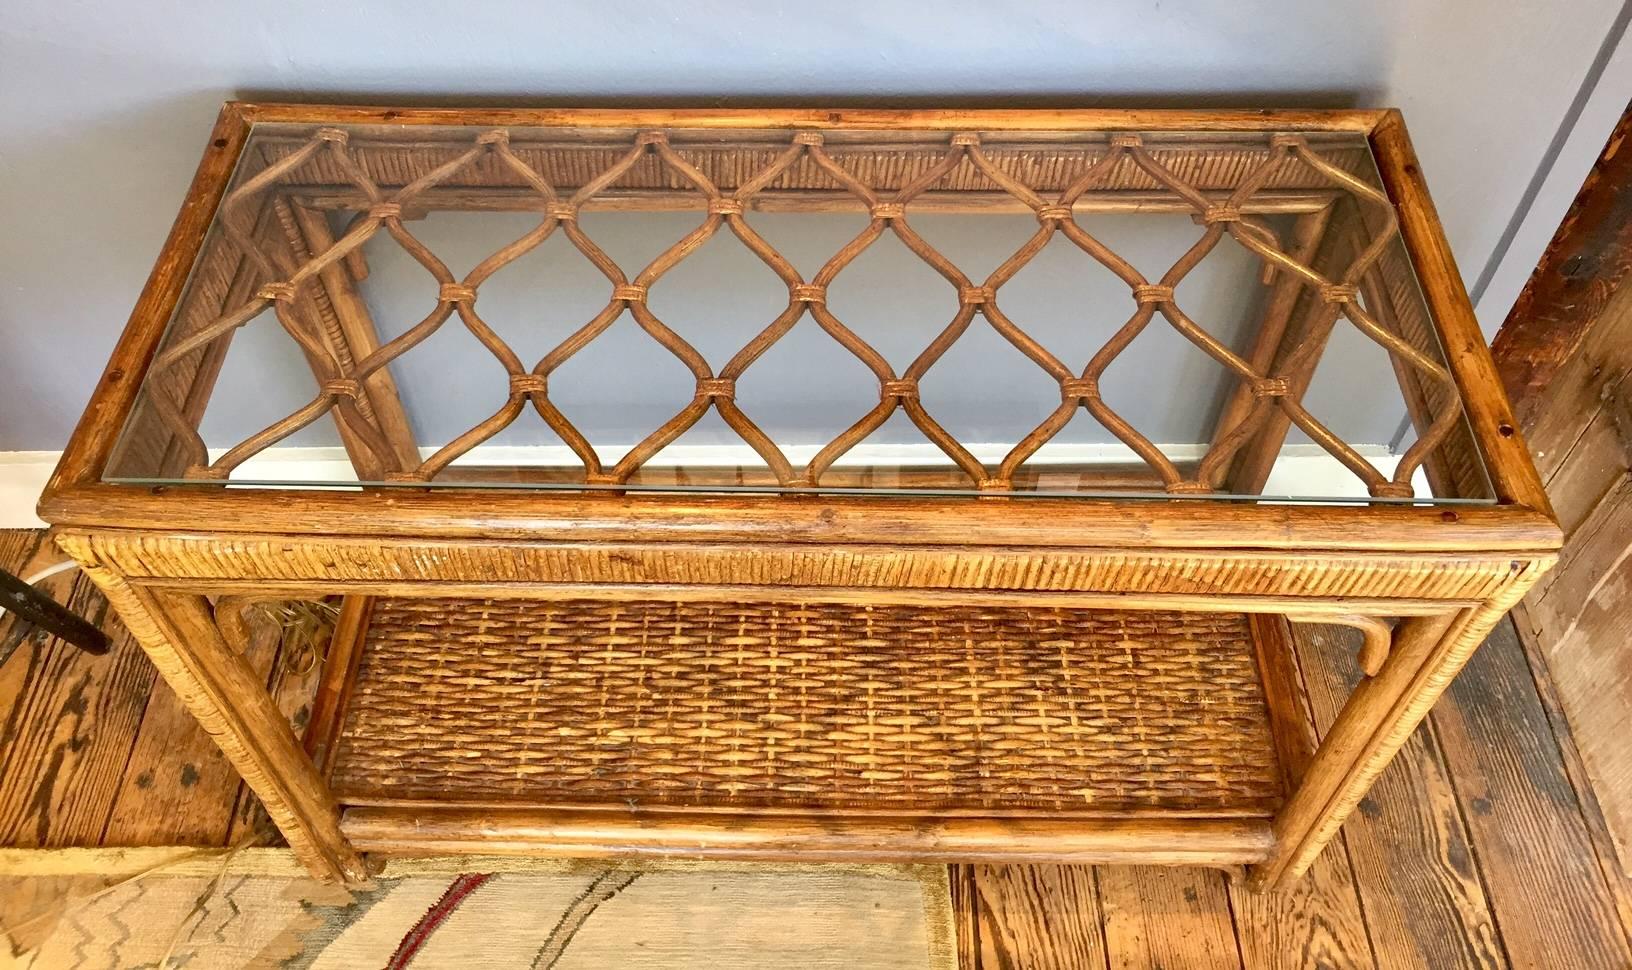 Stylish rattan console in a fairly short length, having lower woven shelf and top criss cross design seen through a piece of glass.